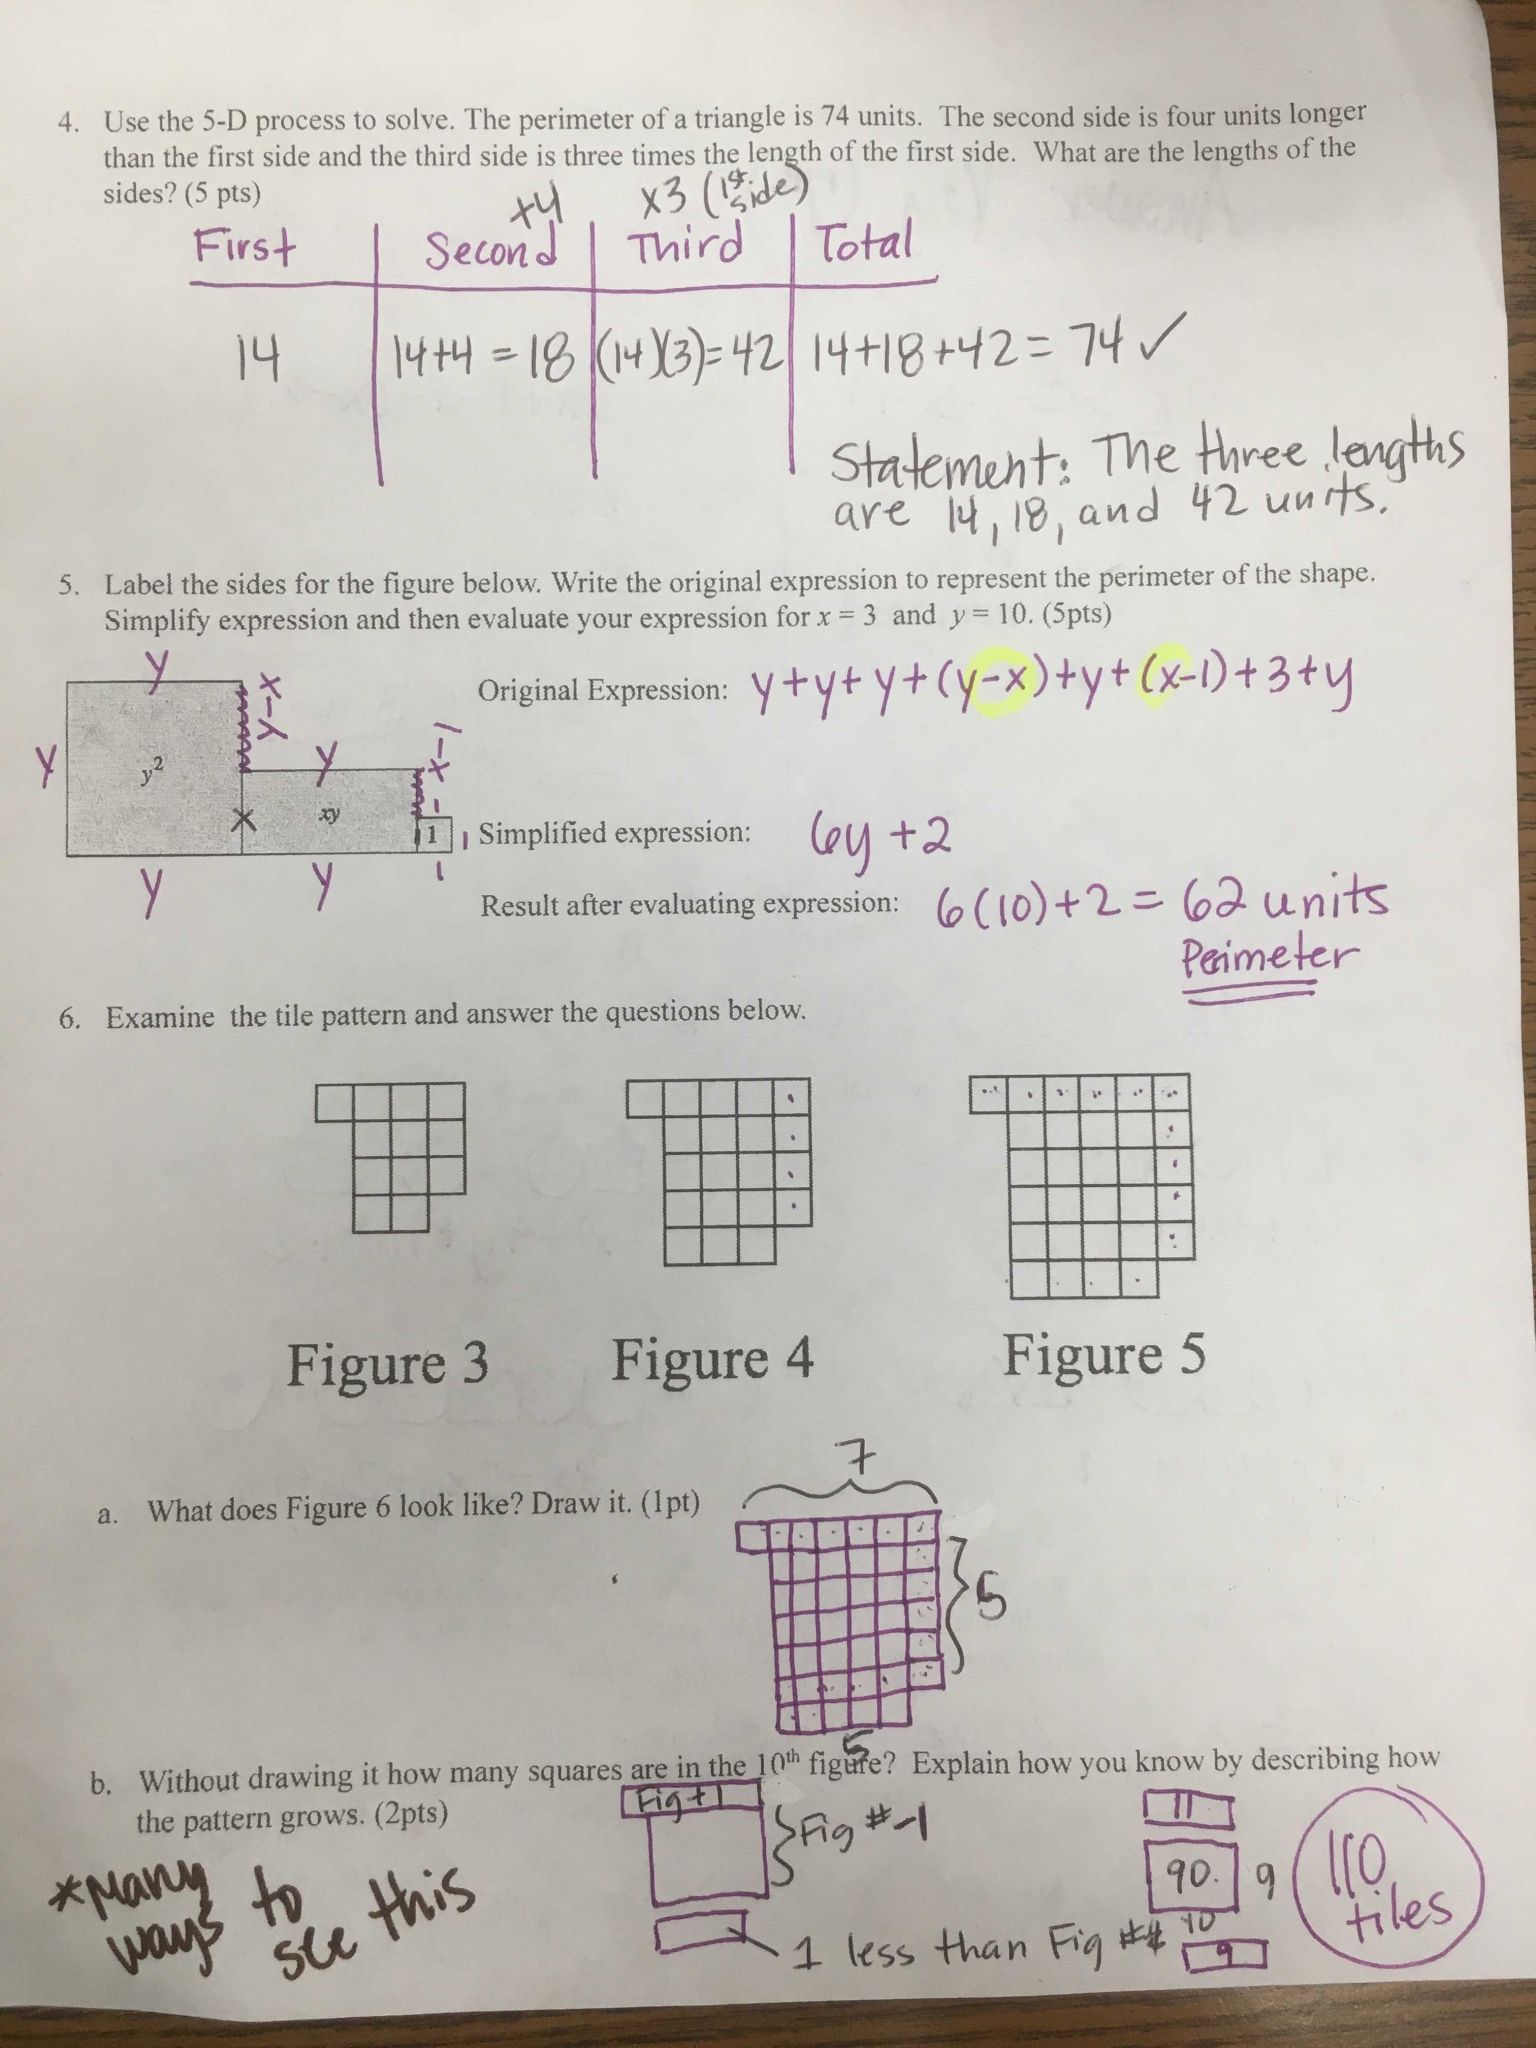 Simplifying Algebraic Expressions Worksheet Answers Along with 8th Grade Resources – Mon Core Math